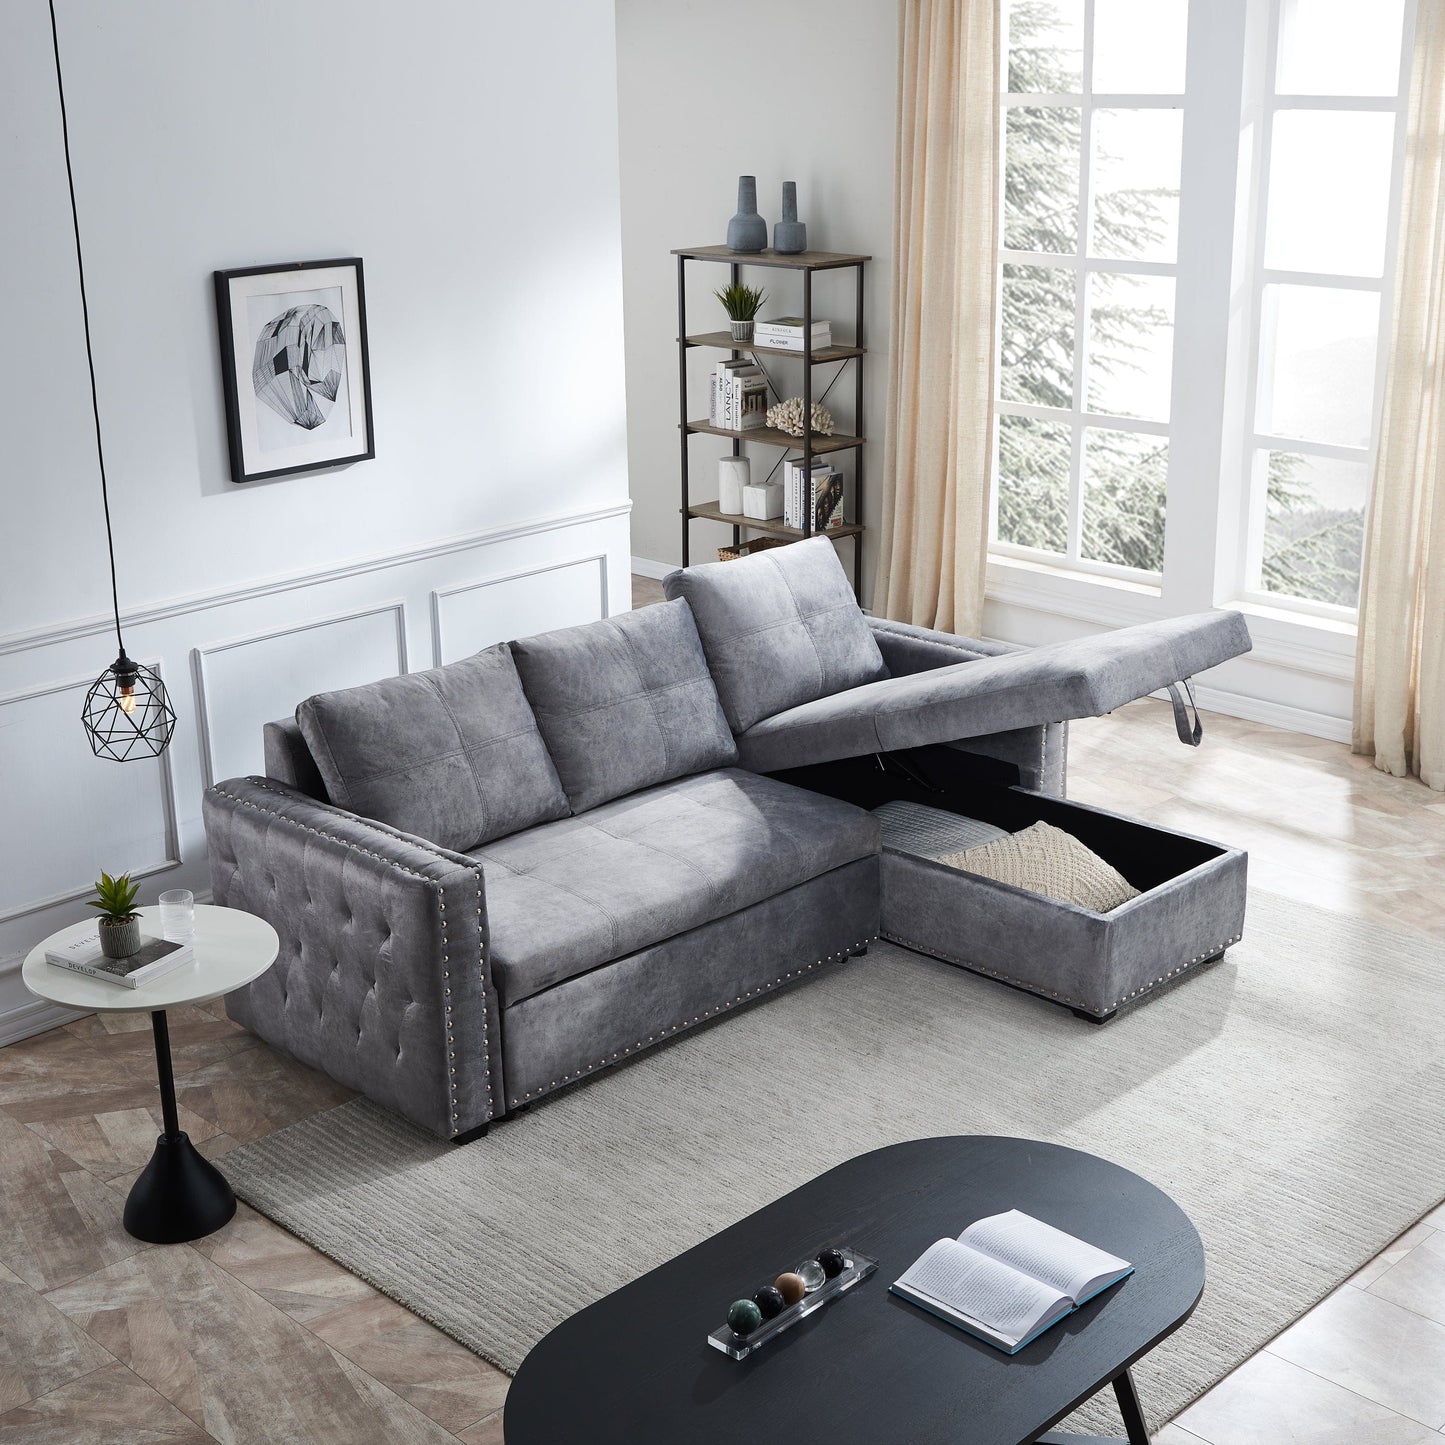 Sectional sofa with pulled out bed,  2 seats sofa and reversible chaise with storage, both hands with copper nail, GREY, (91" x 64" x 37")